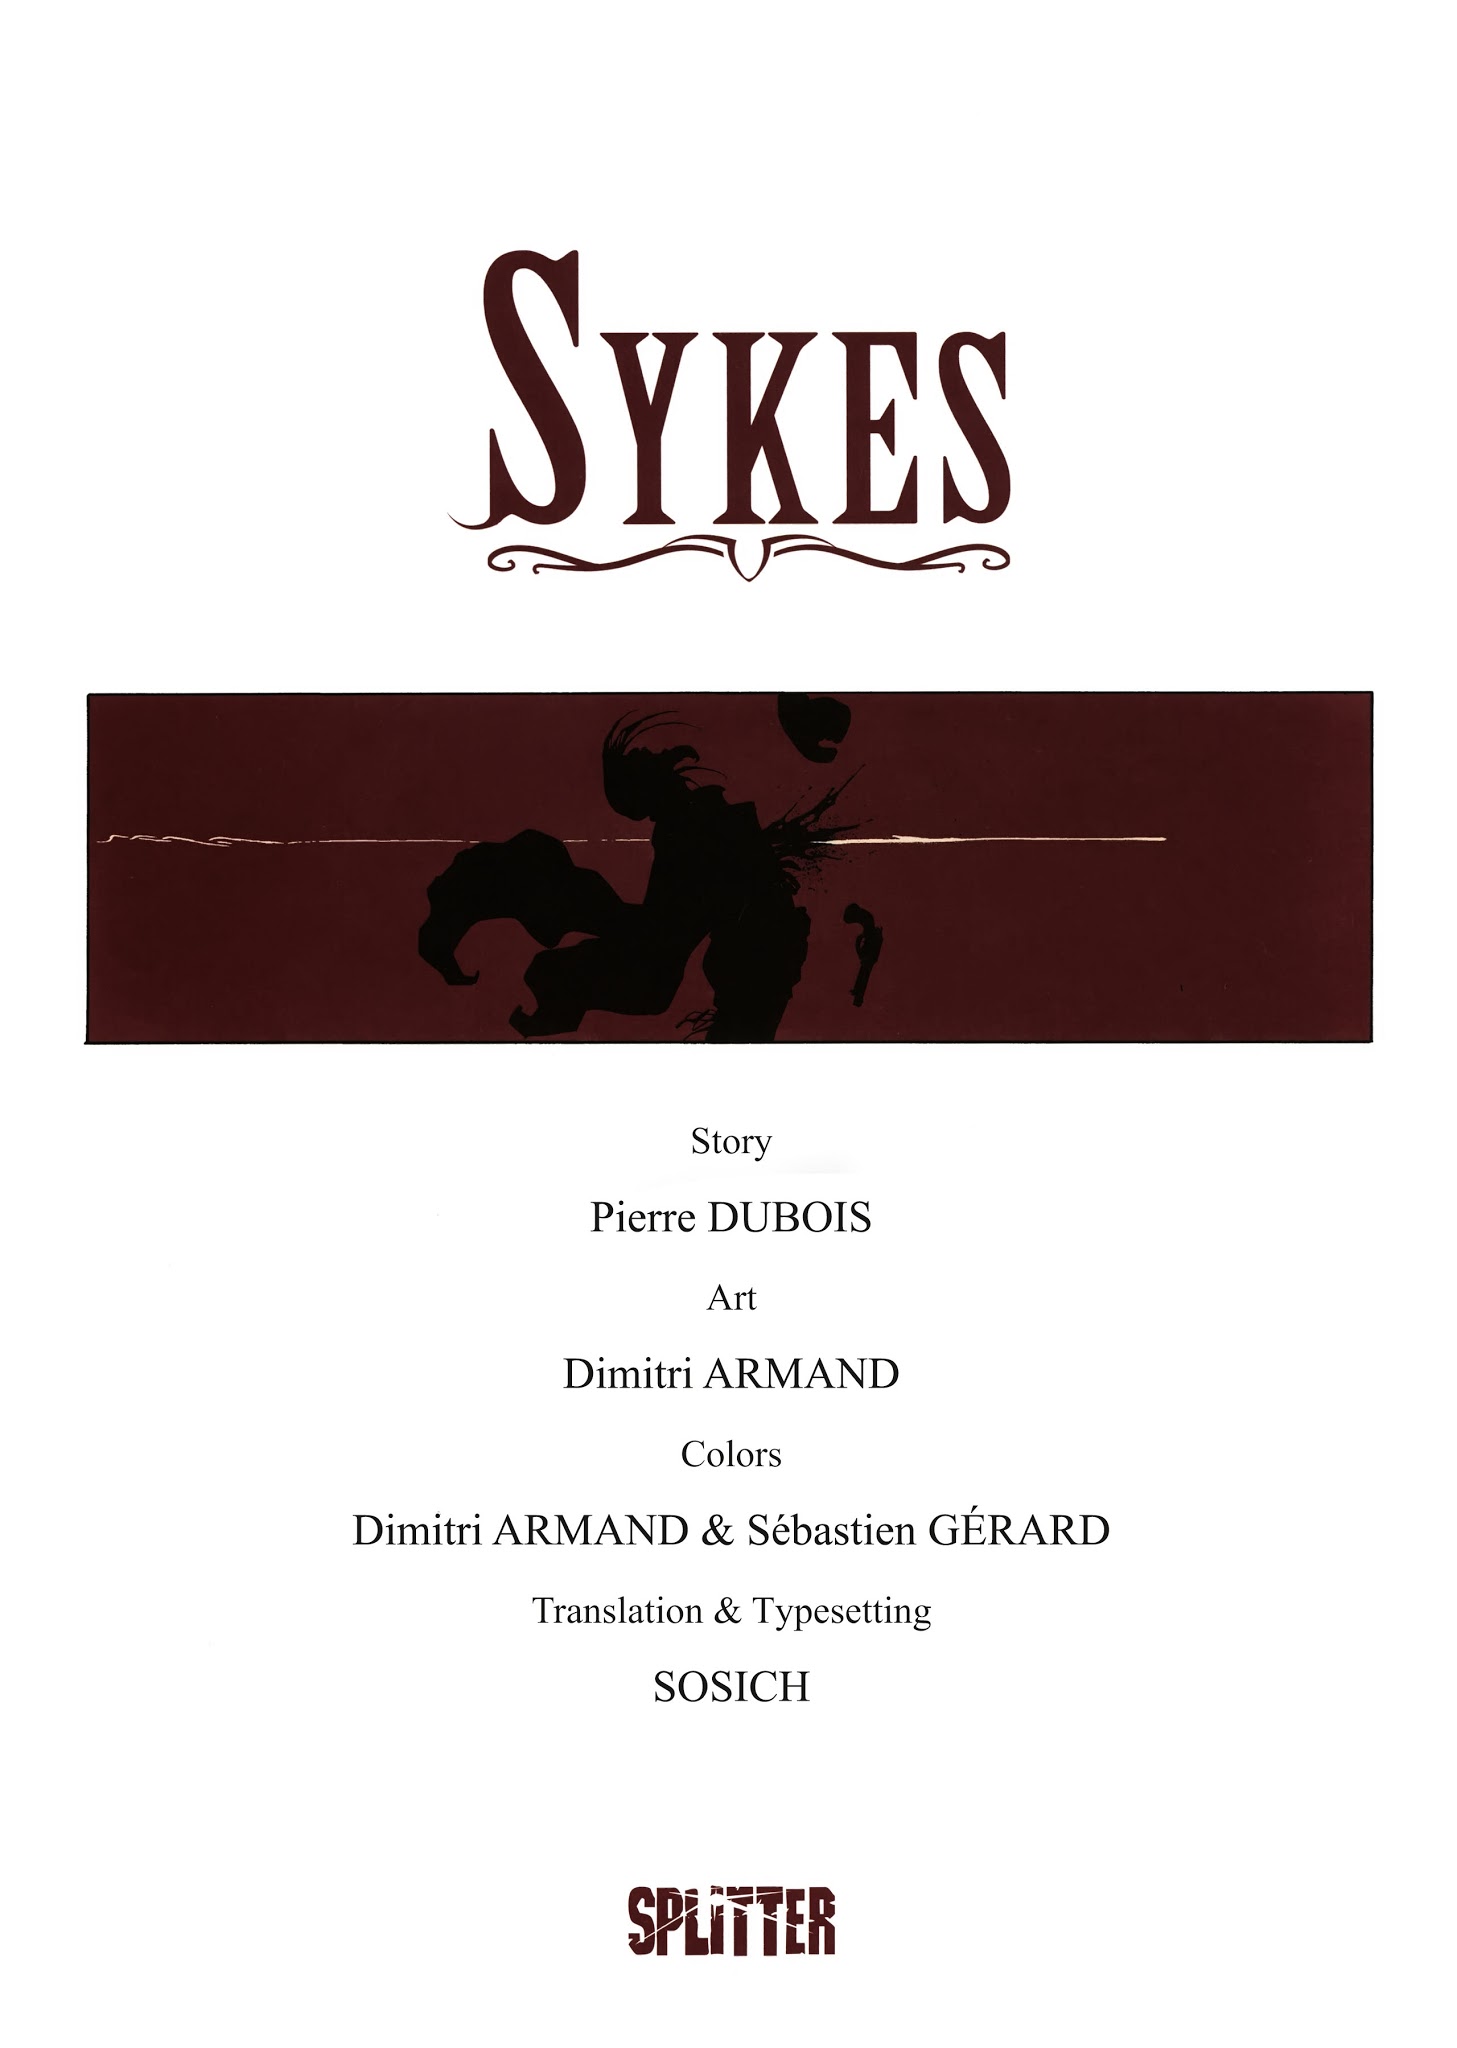 Read online Sykes comic -  Issue # TPB - 4